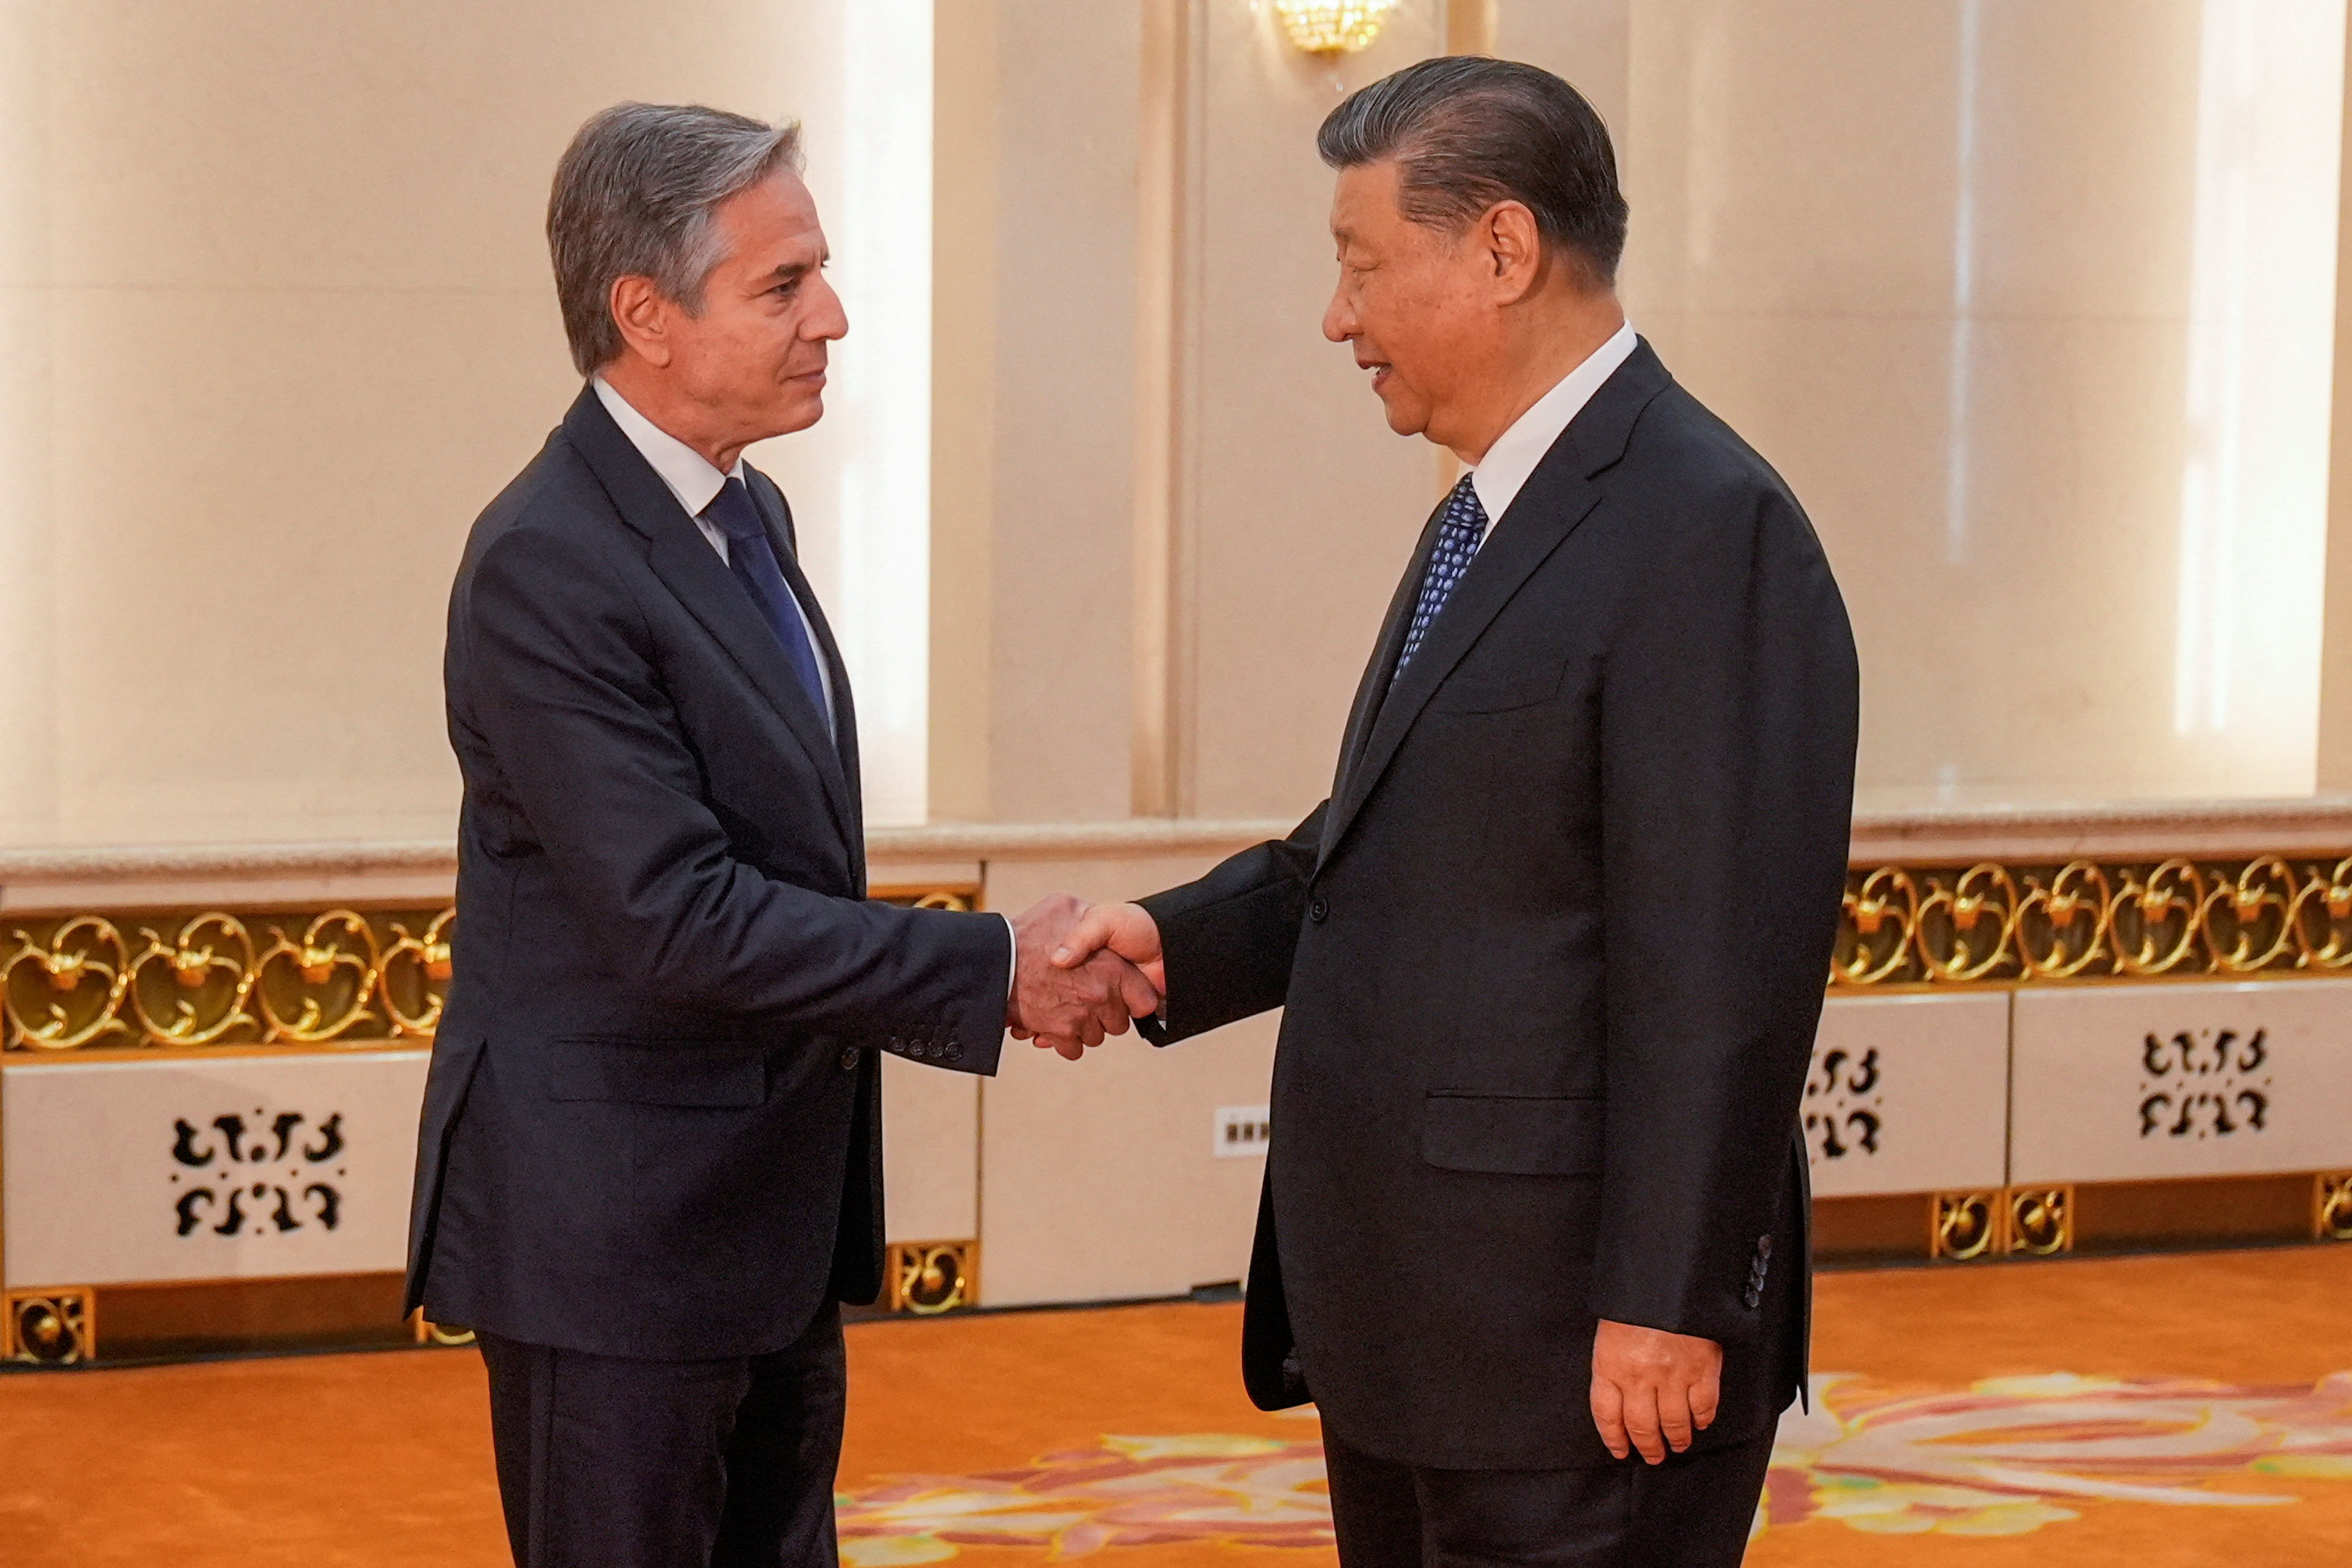 US Secretary of State Antony Blinken meets Chinese President Xi Jinping at the Great Hall of the People in Beijing on Friday afternoon. Photo: Reuters